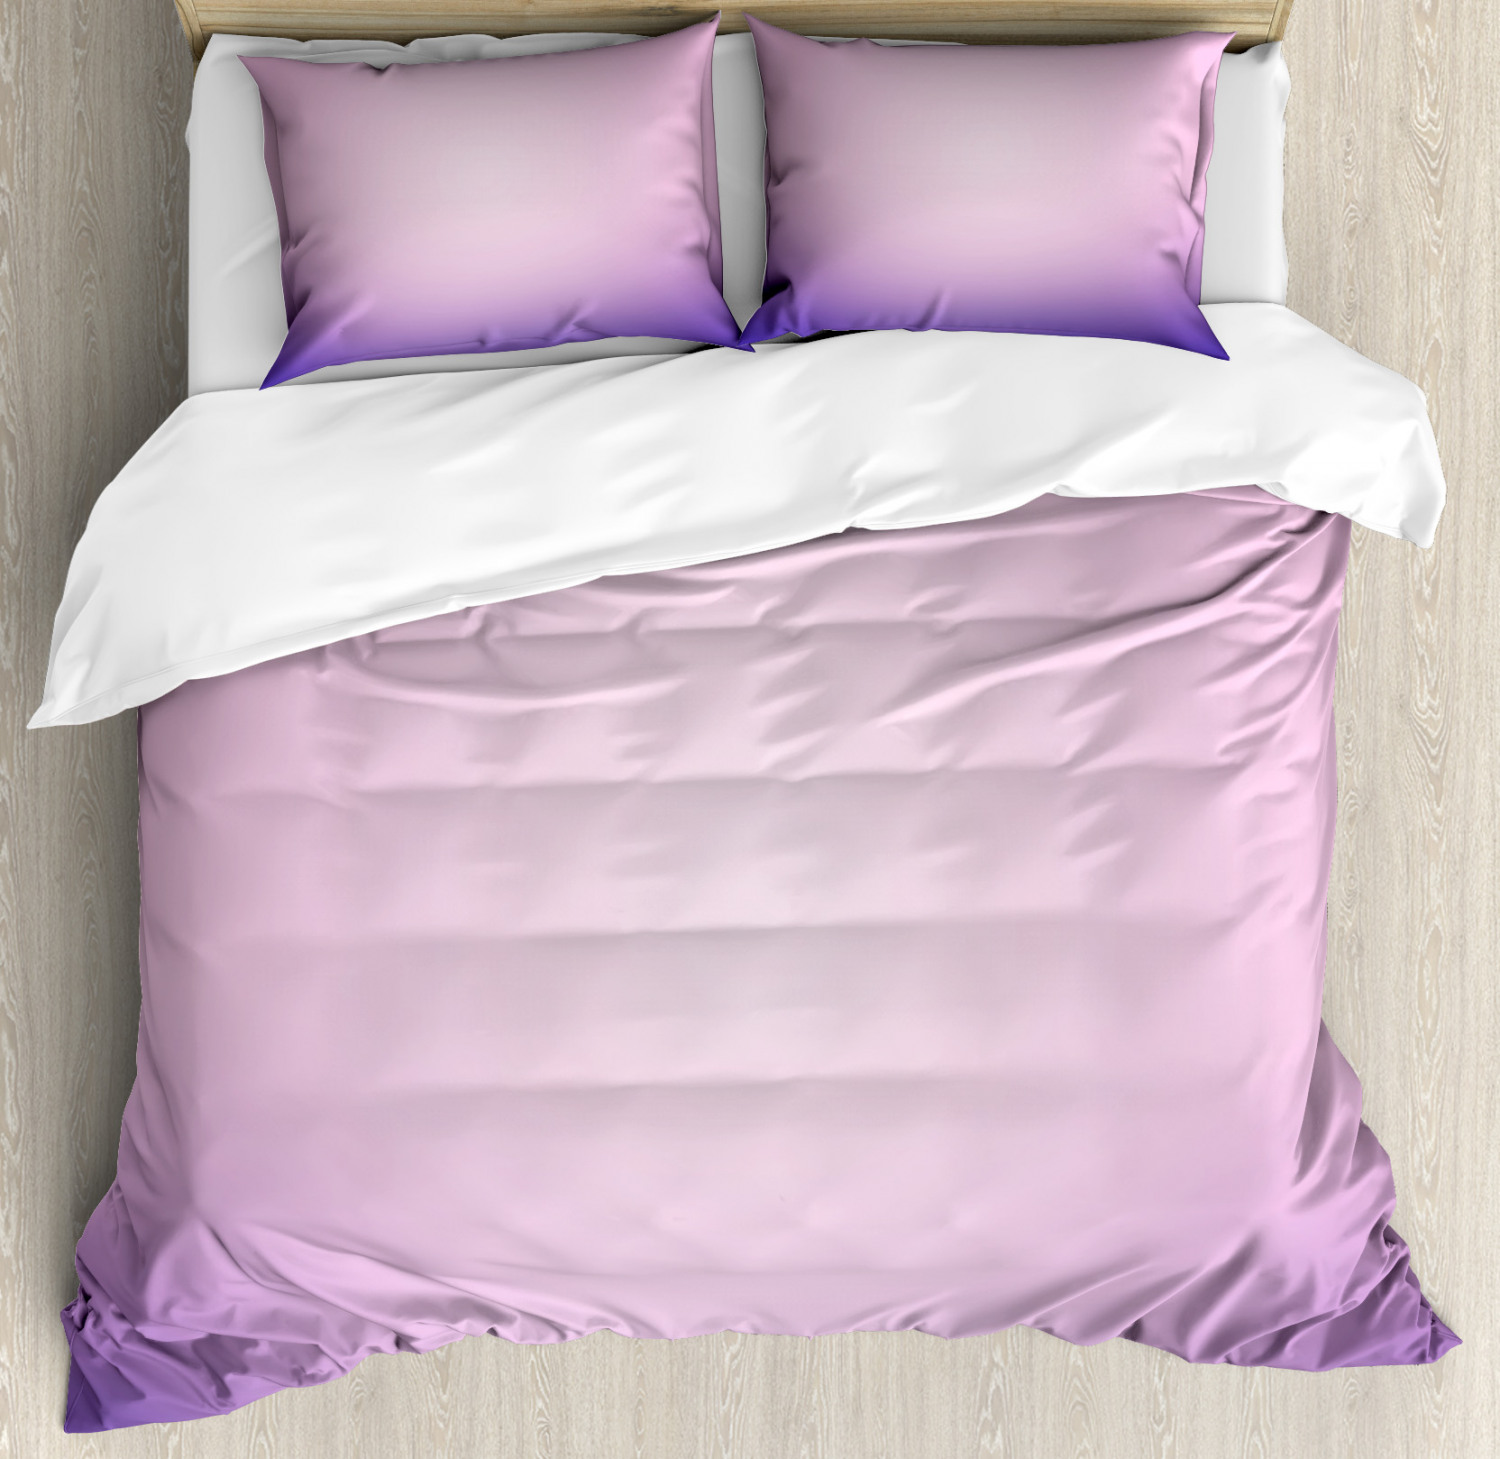 Lavender Duvet Cover Set With Pillow Shams Pink And Purple Ombre